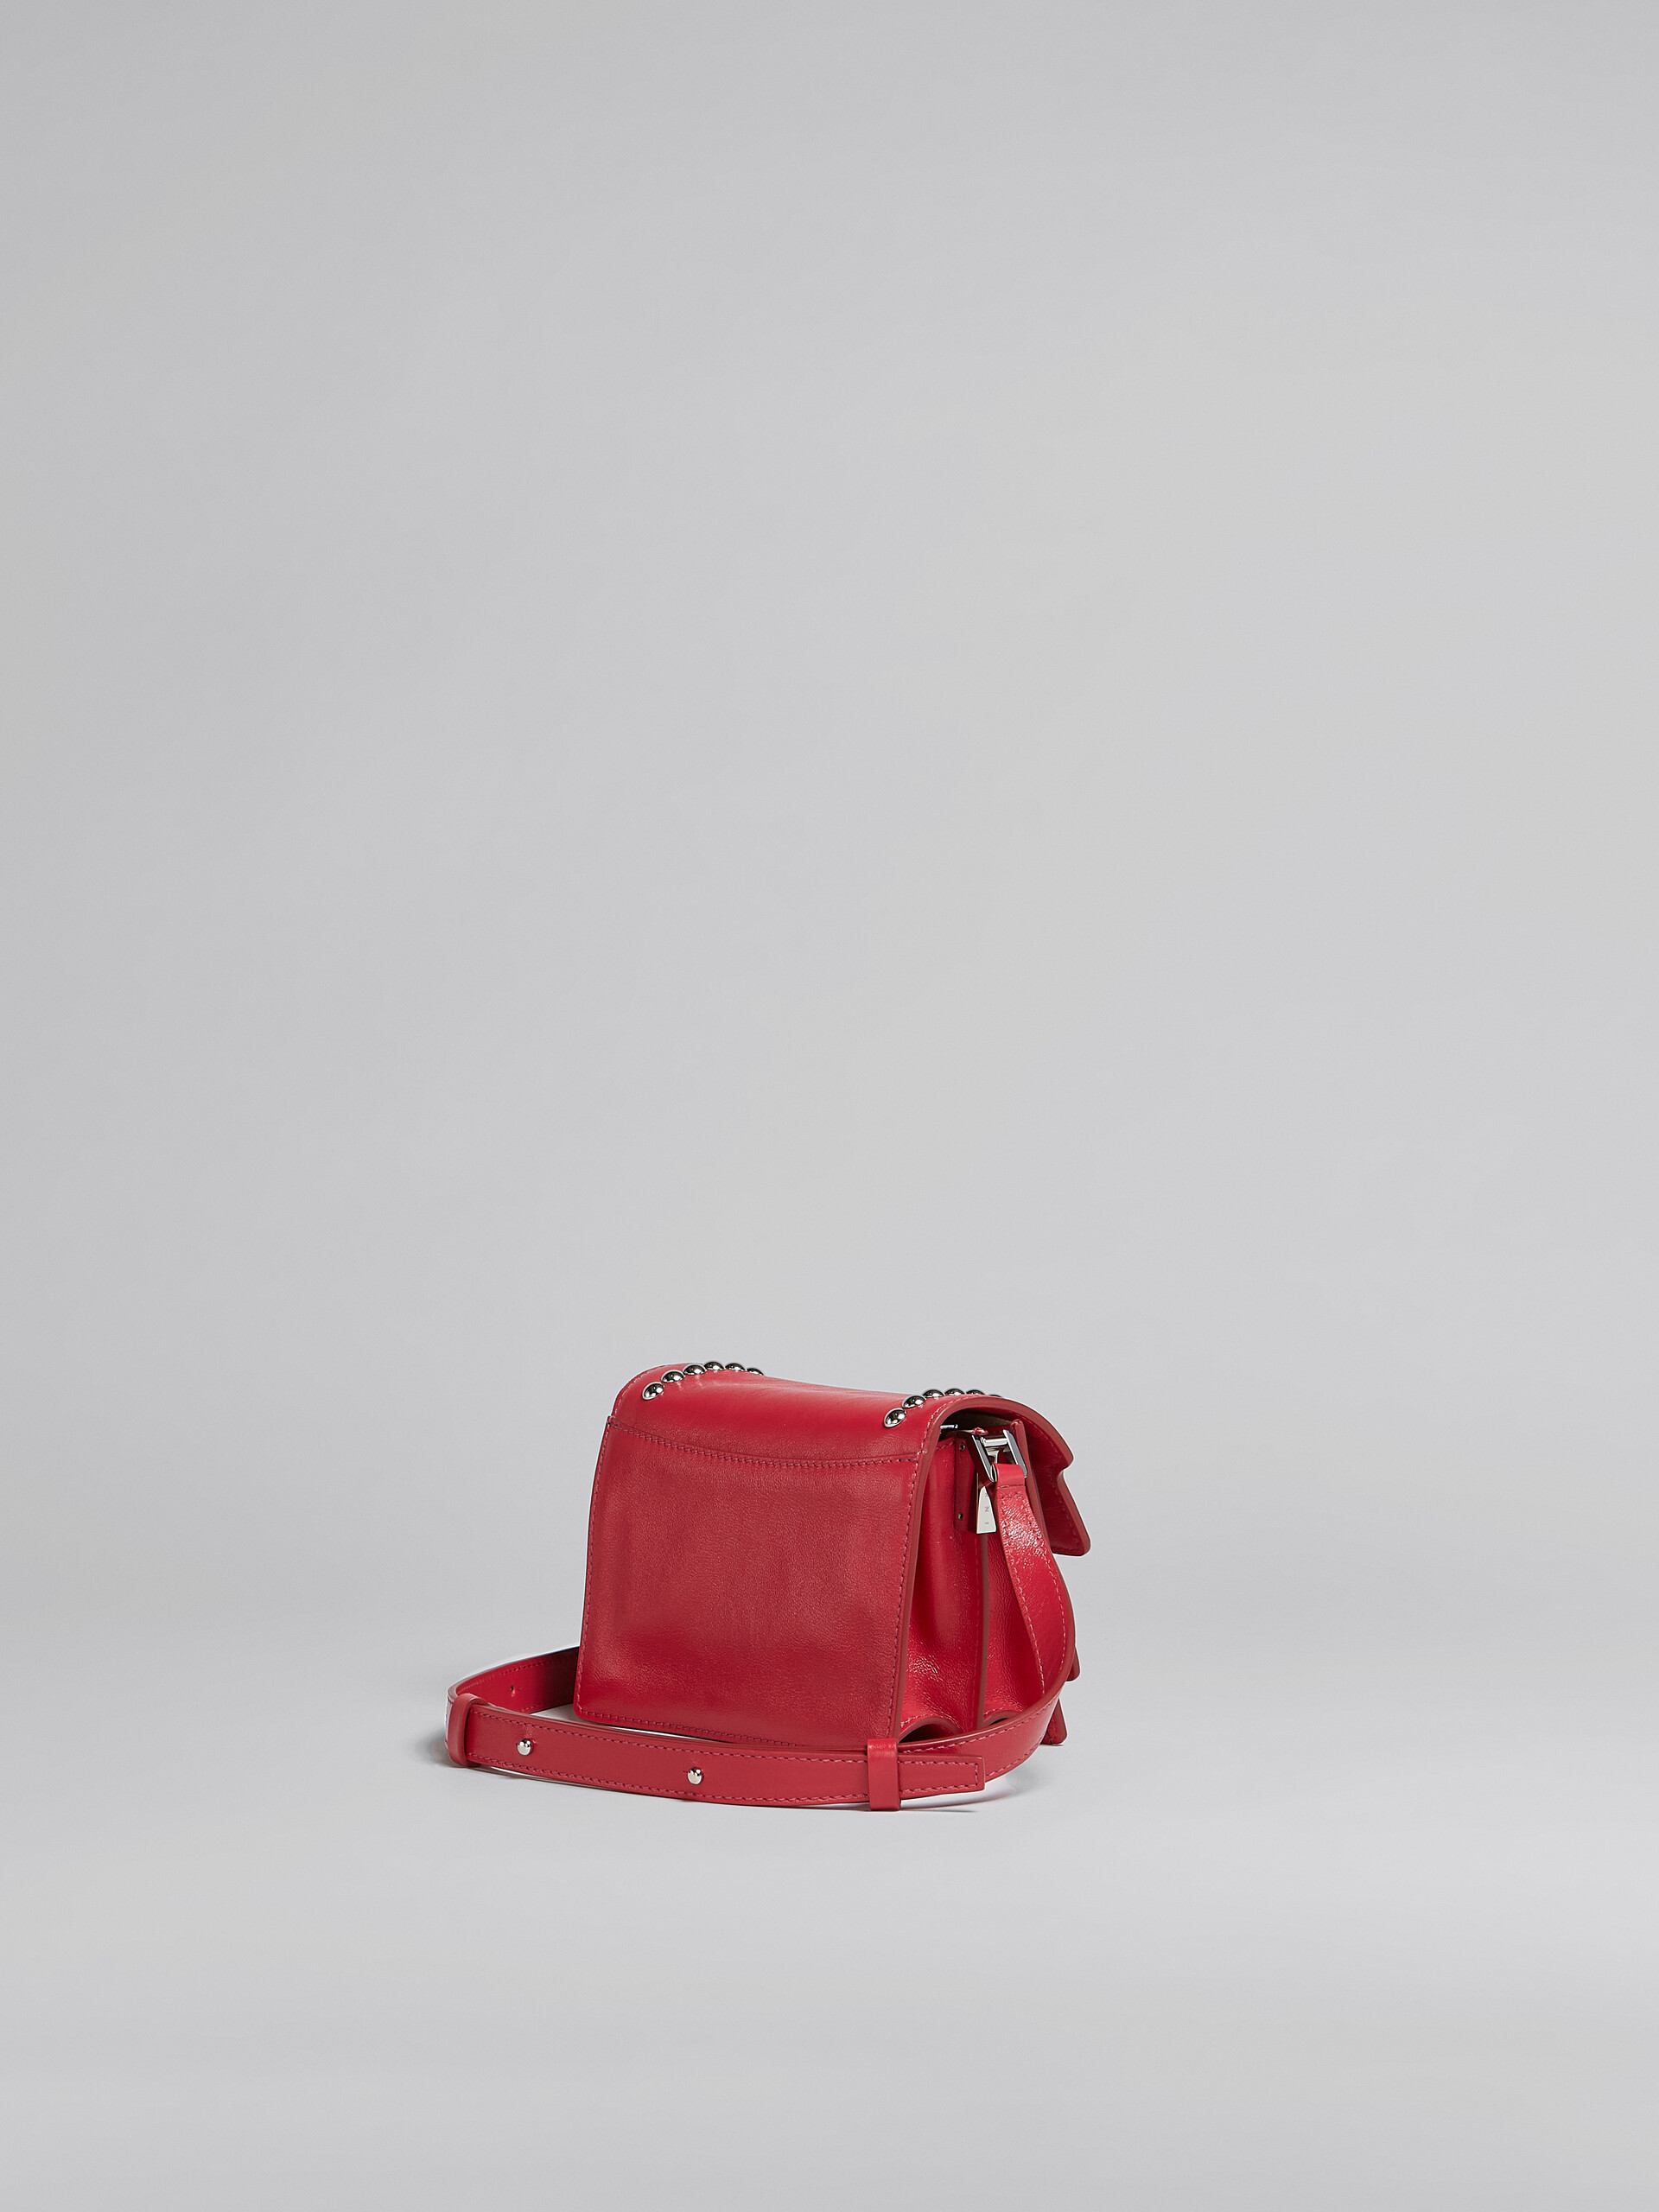 Trunk Soft Mini Bag in red leather with studs - Shoulder Bag - Image 3